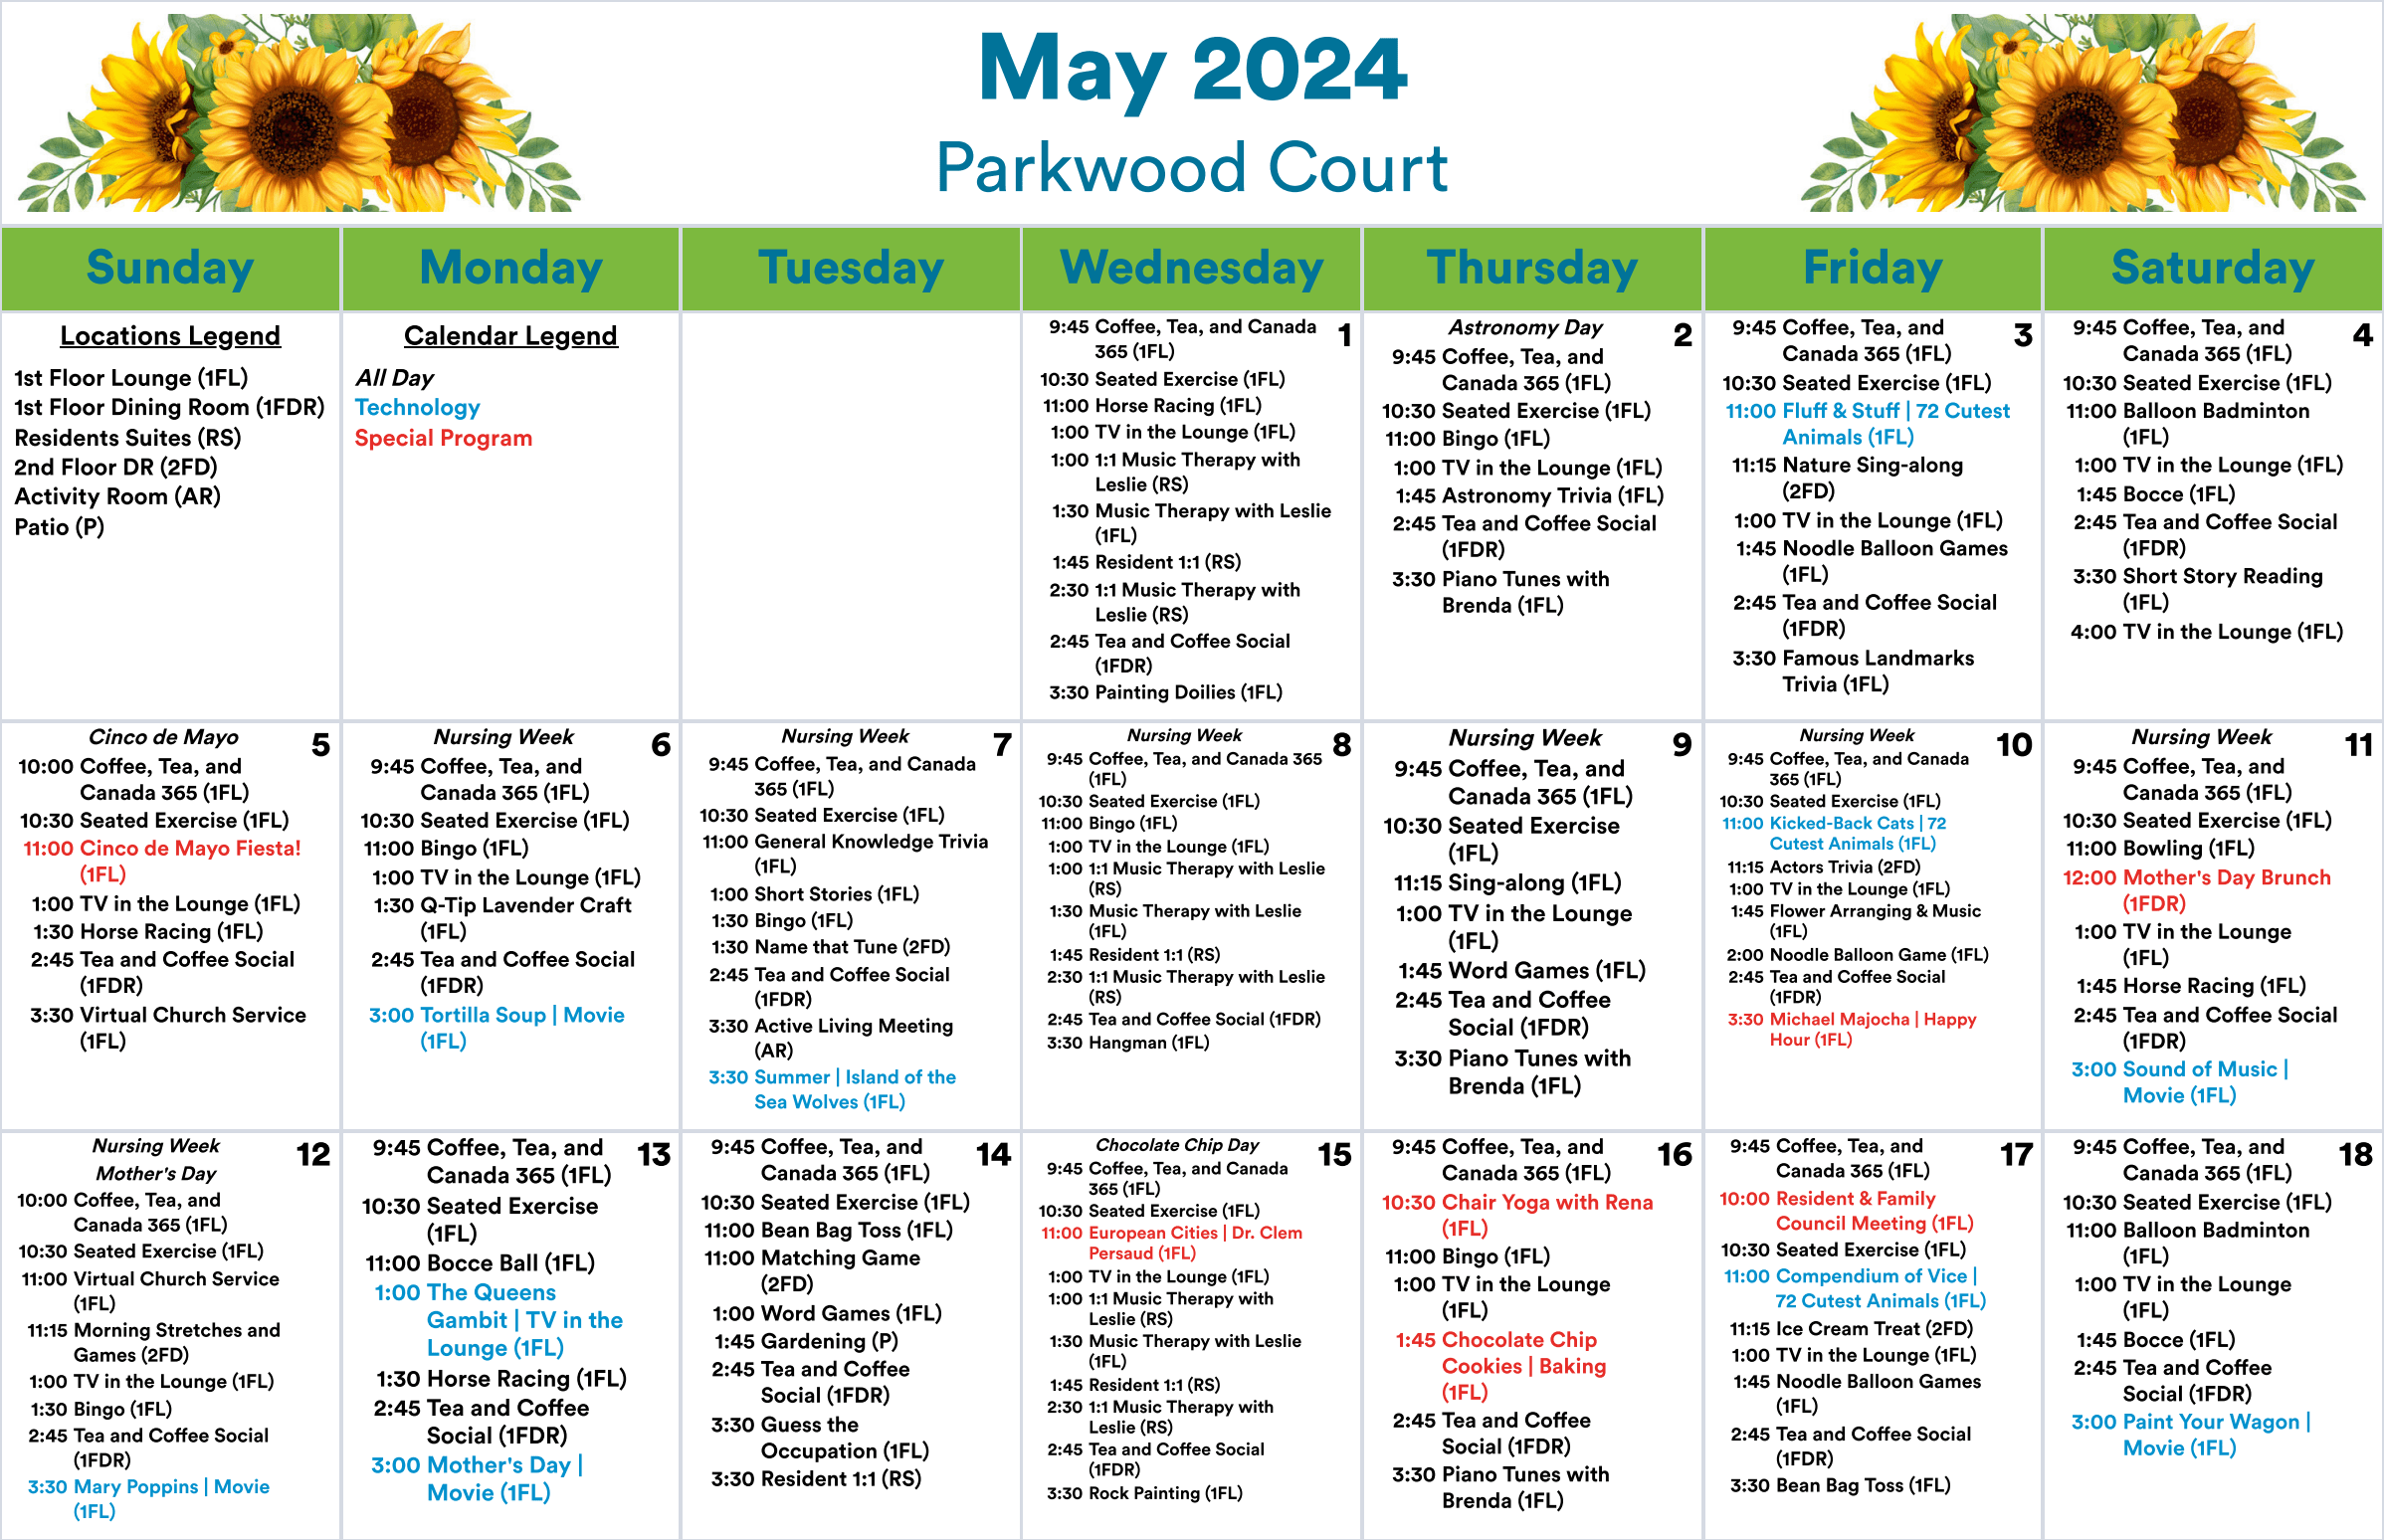 Parkwood Court May 1-18 2024 event calendar